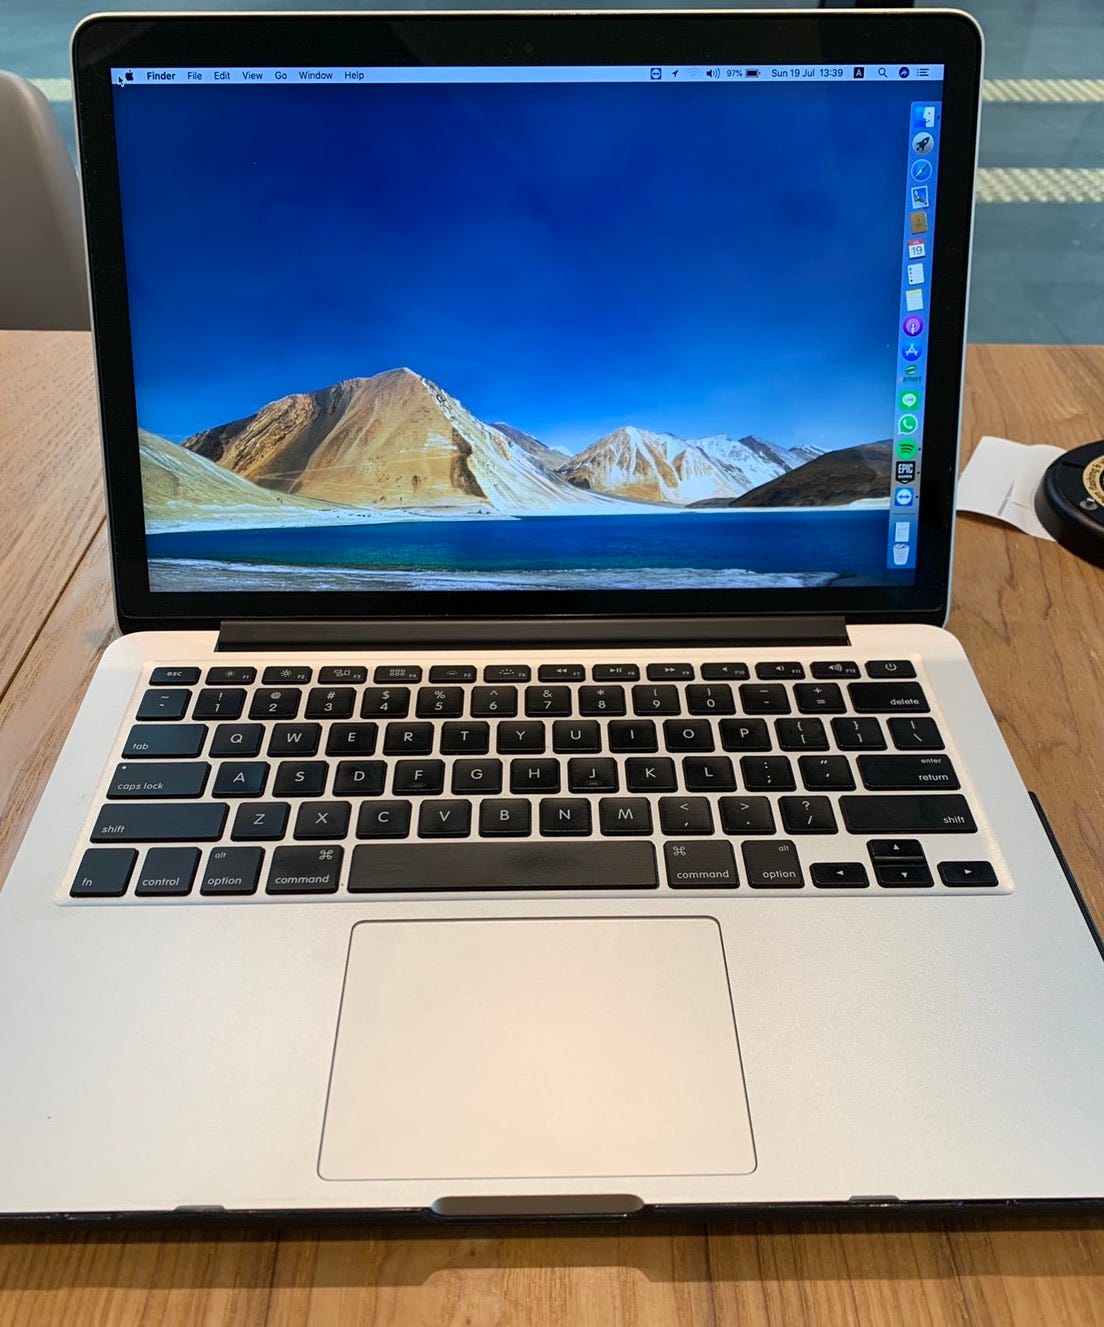 MacBook Pro Model 2015 Staingate Replacement still available as of Aug 2020  | by Adrian Istani | Mac O'Clock | Medium